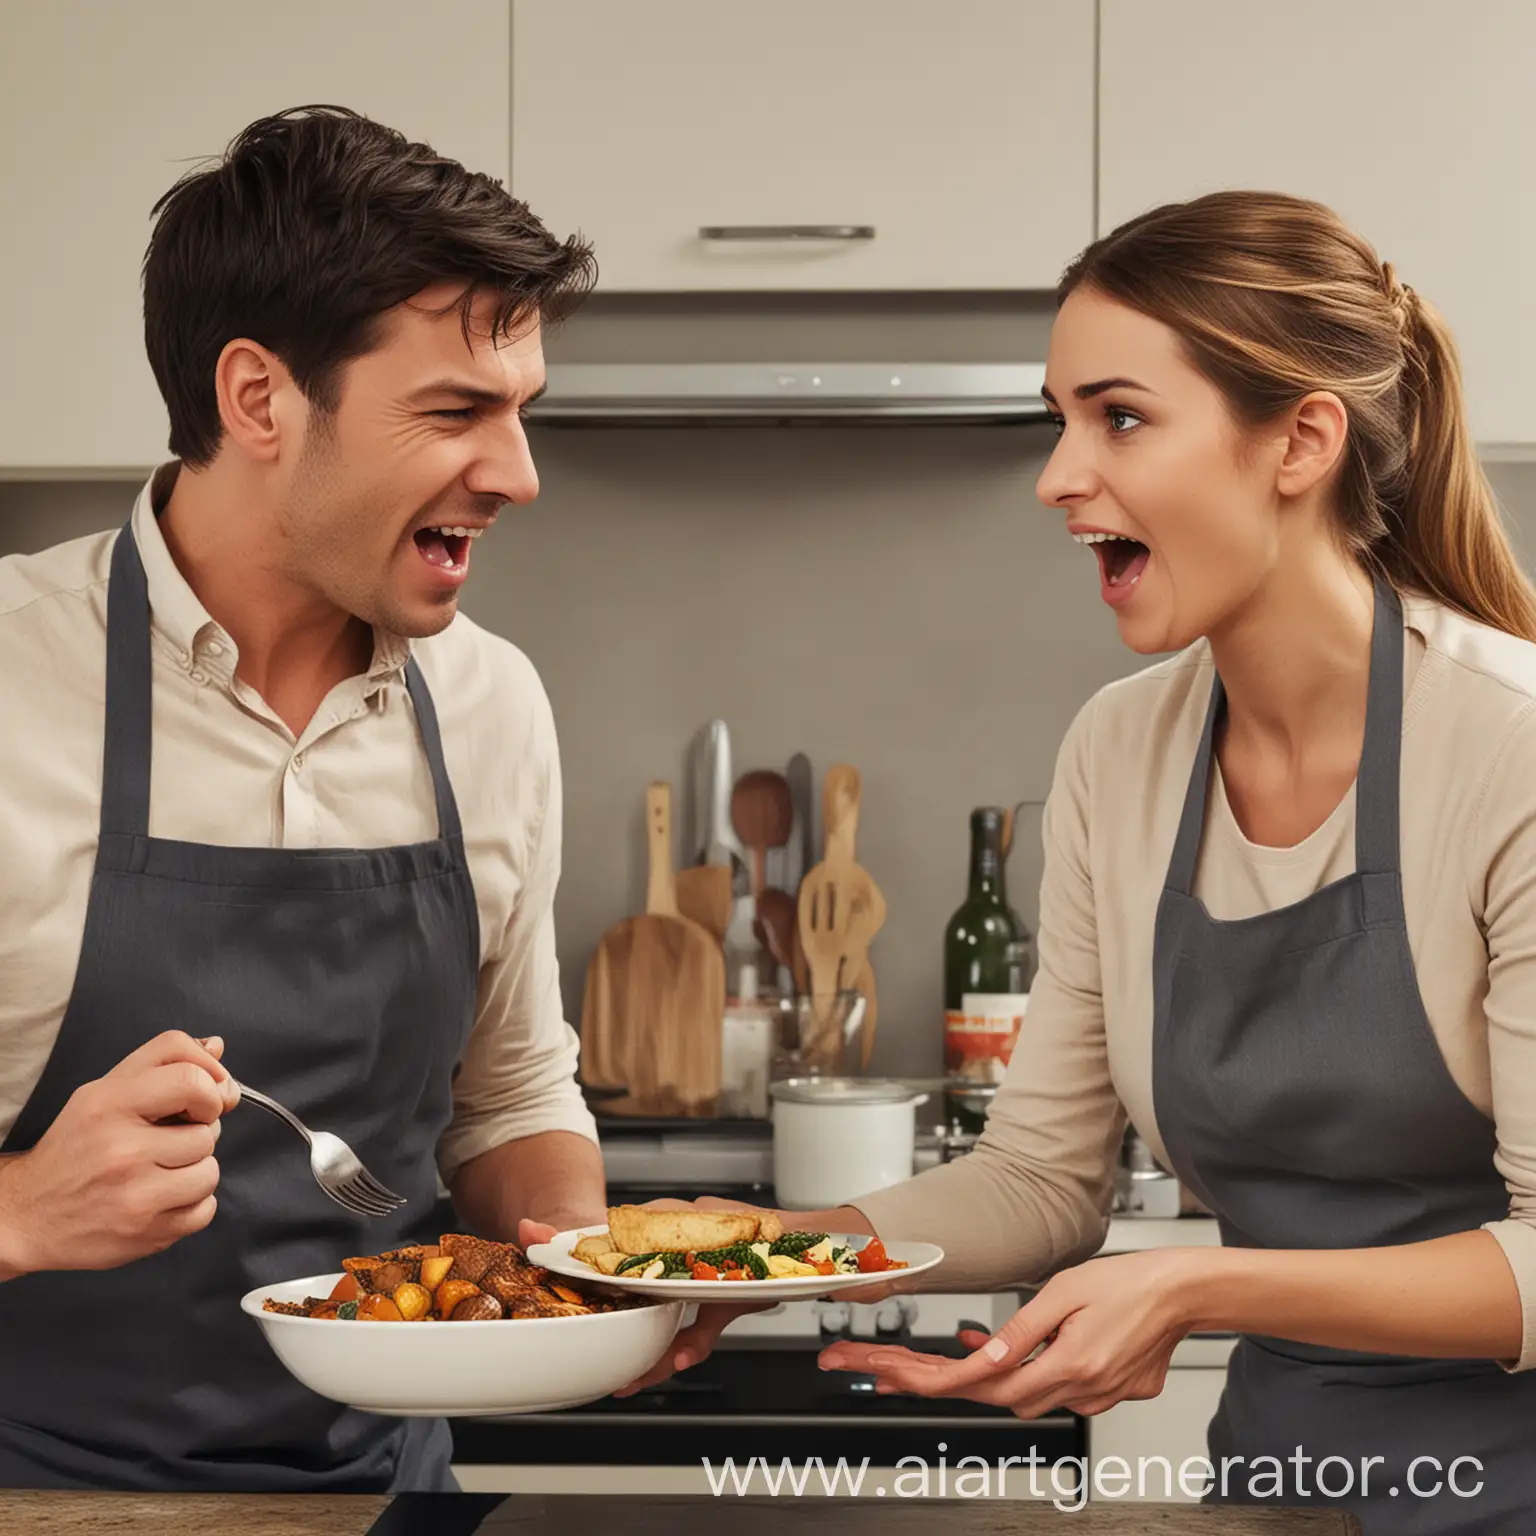 Couple-Arguing-Over-Dinner-Choices-Kitchen-Conflict-Scene